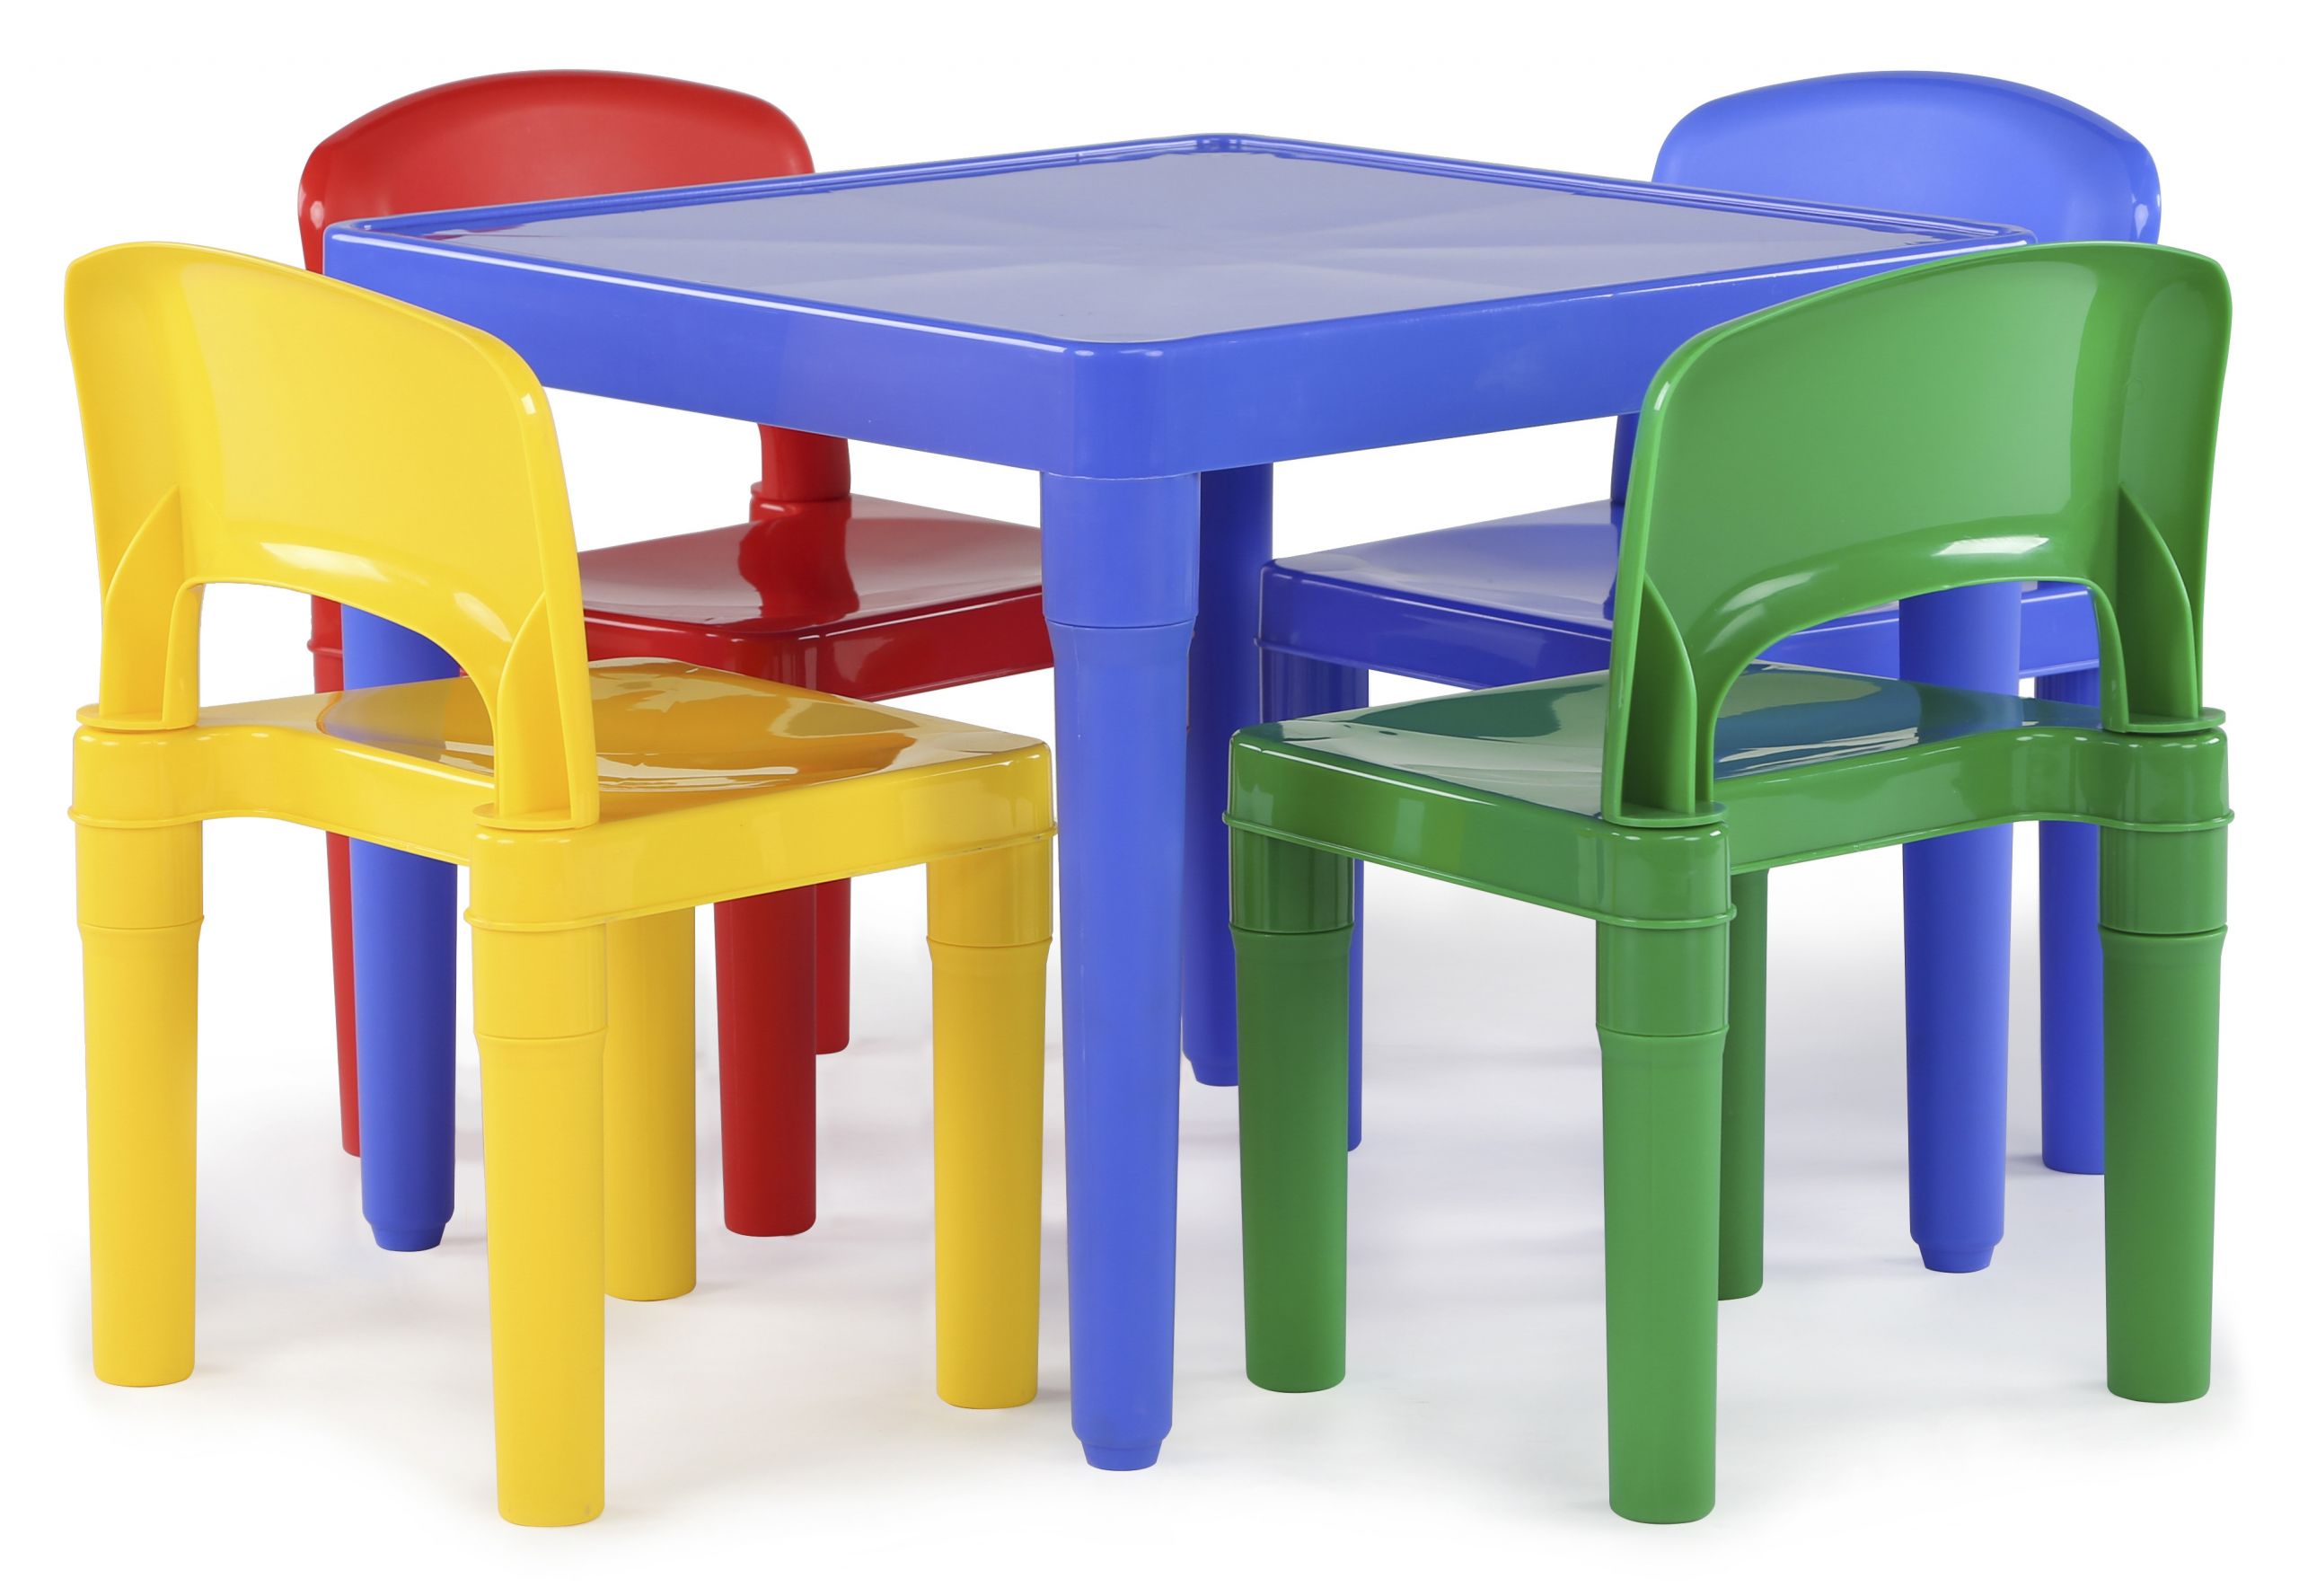 Kids Table And Chair Set
 Tot Tutors Kids Plastic Table and 4 Chairs Set Primary Colors